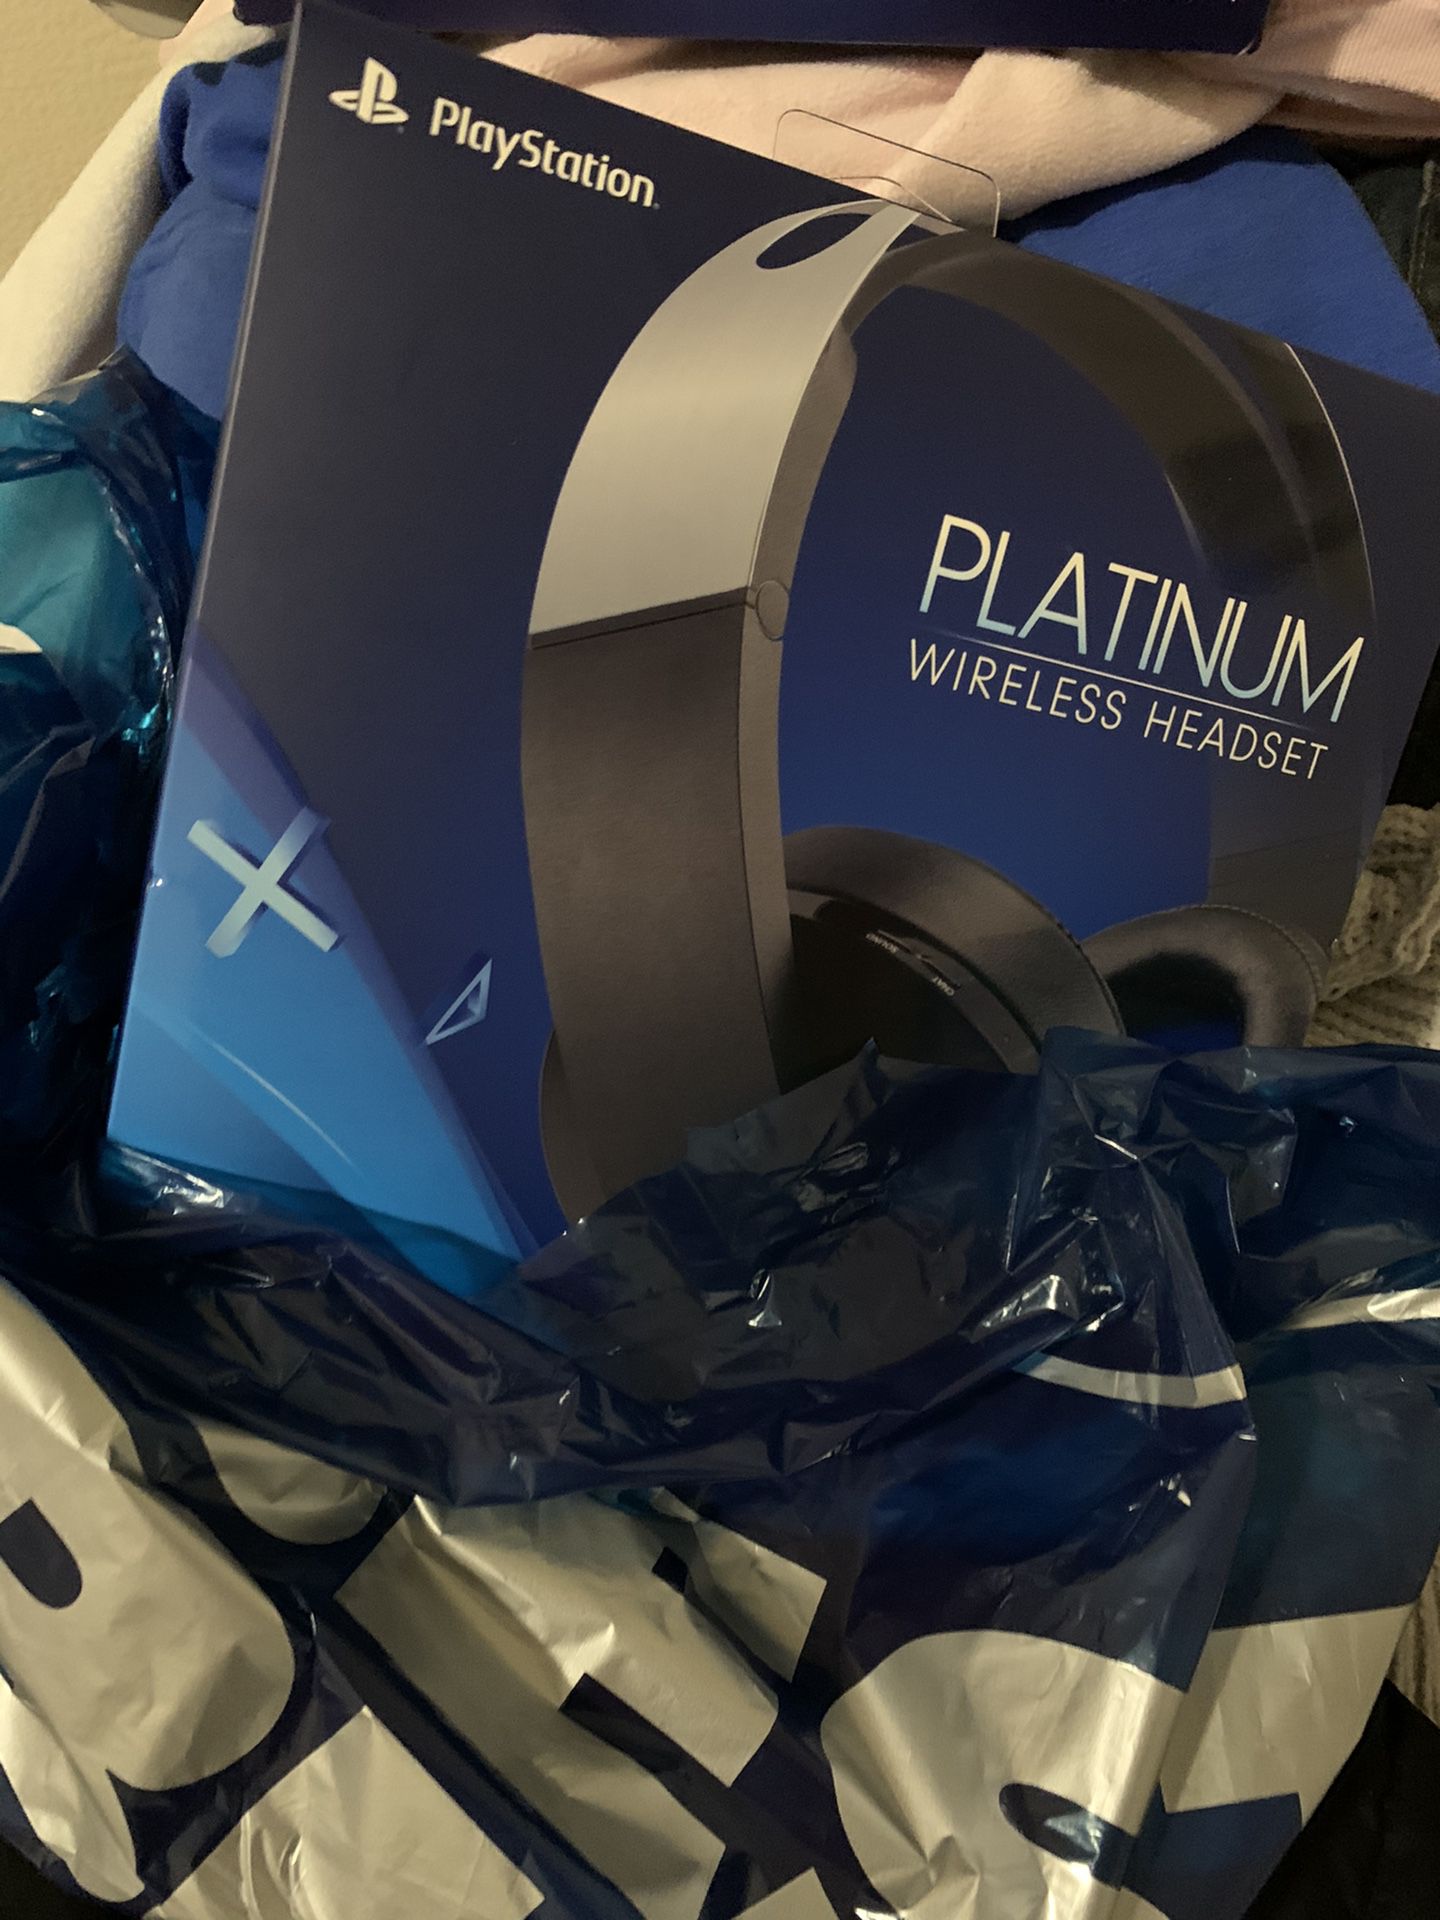 Ps4 platinum headset $115 firm retails at 160+tax